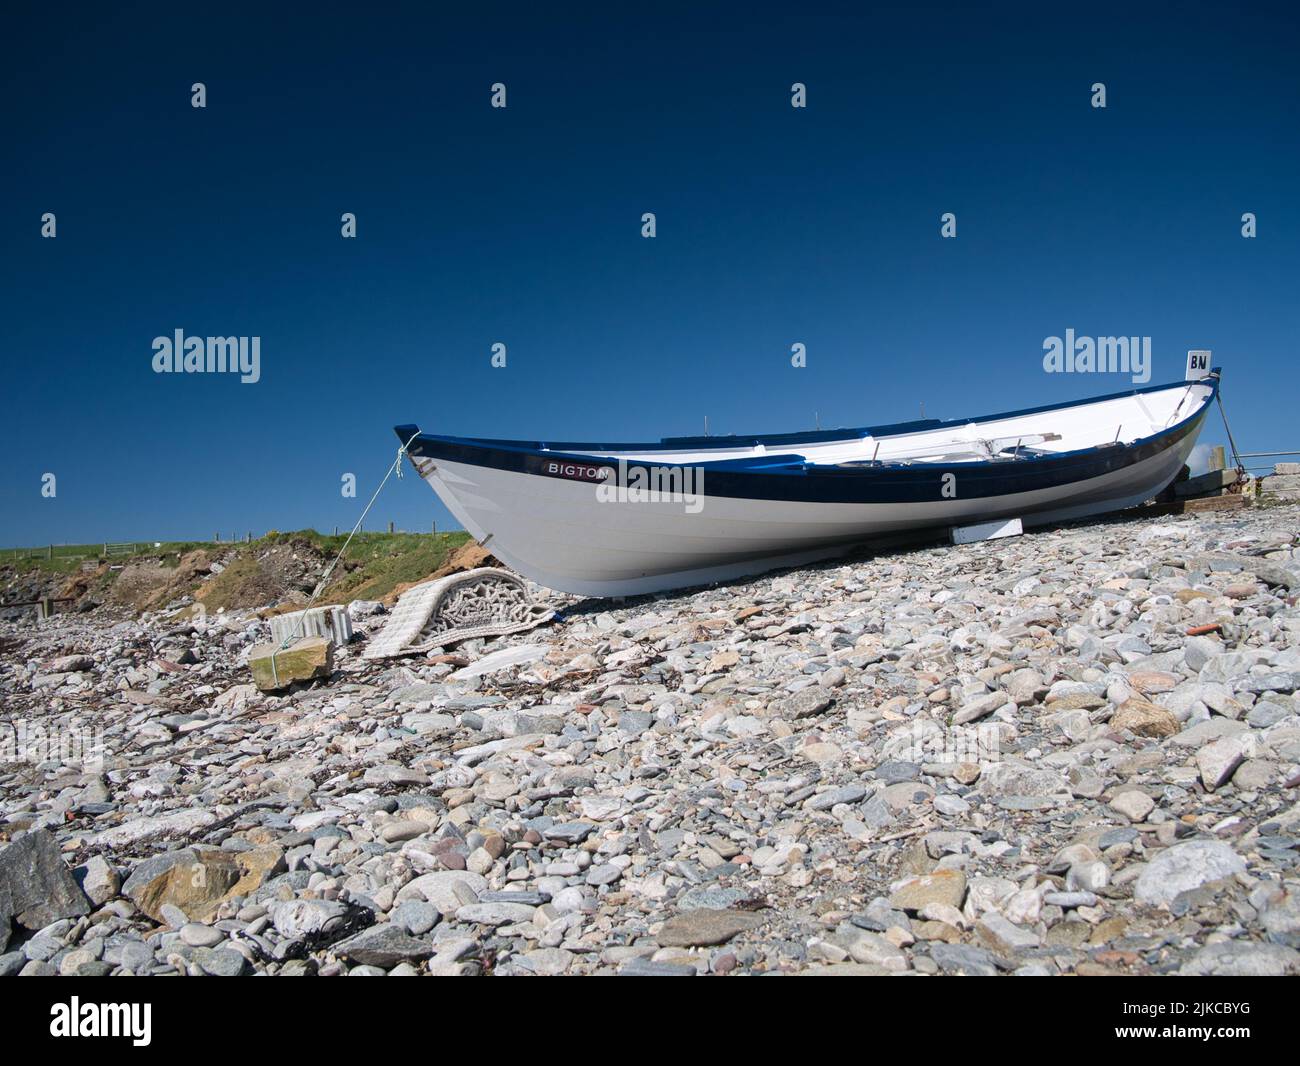 A traditional wooden, clinker built blue and white fishing boat on a pebble beach in southern Shetland, UK. Taken on a sunny day with a cloudless sky. Stock Photo